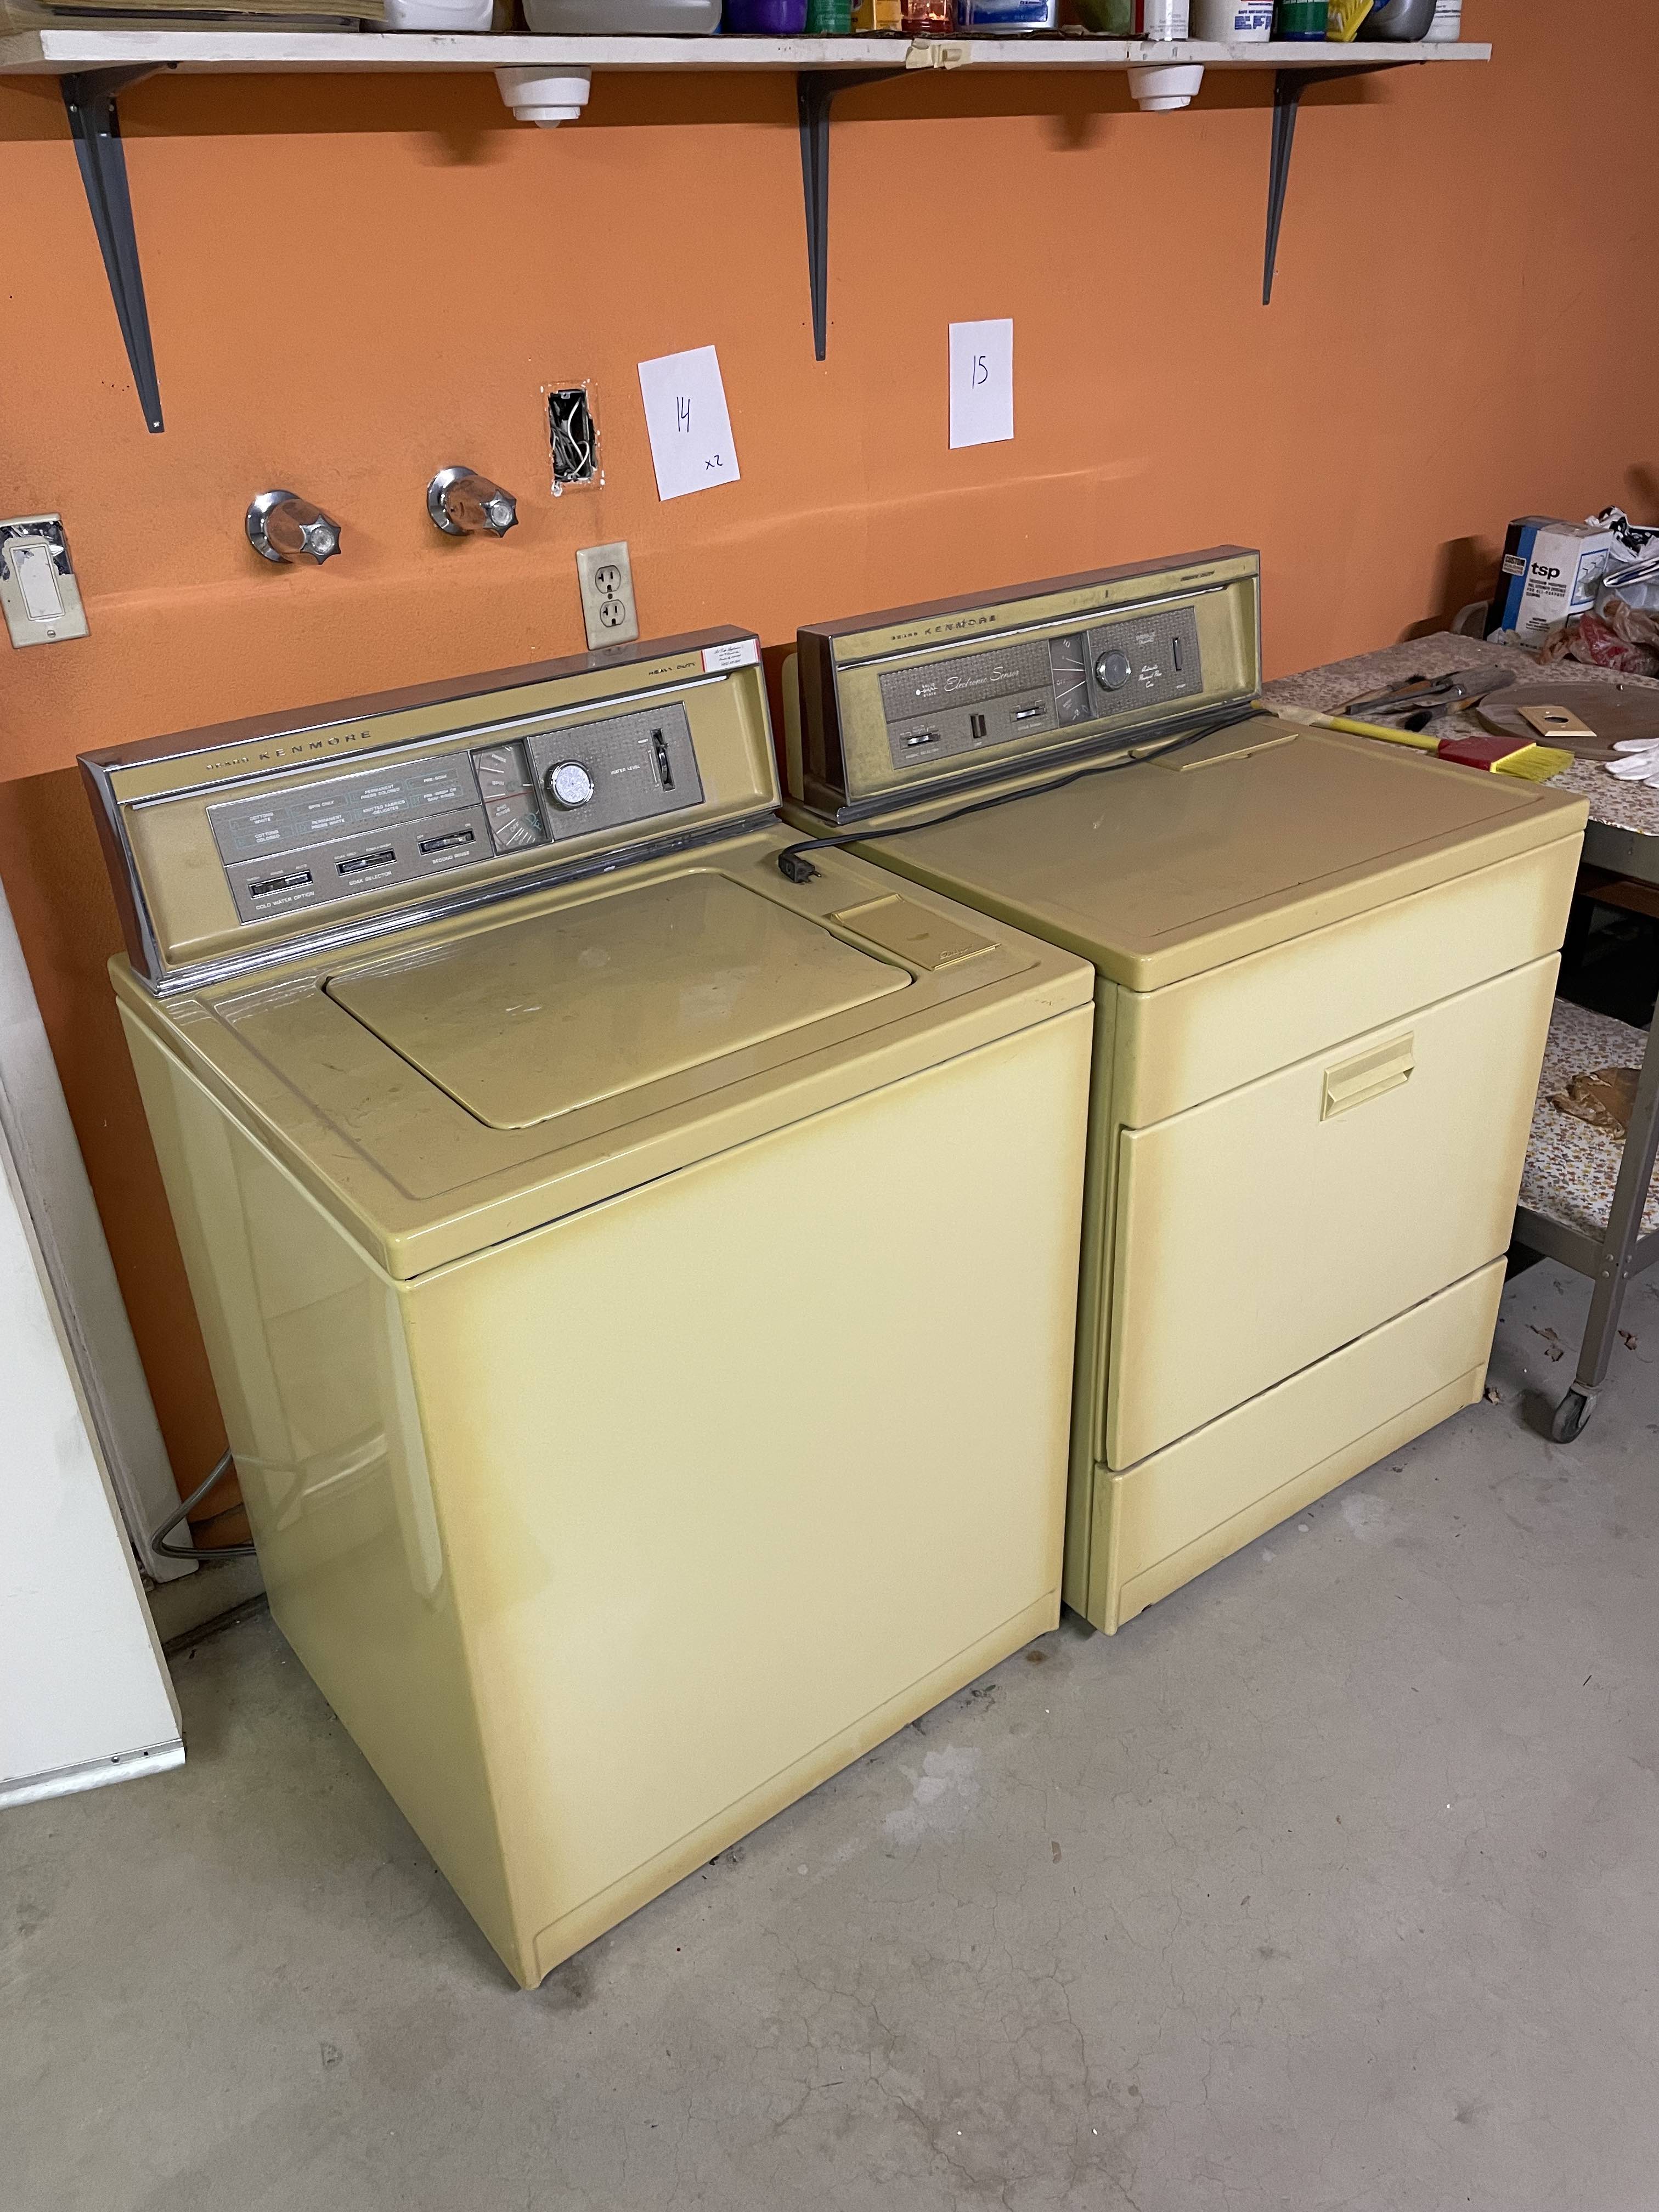 Kenmore washer and dryer from 1970s (museum